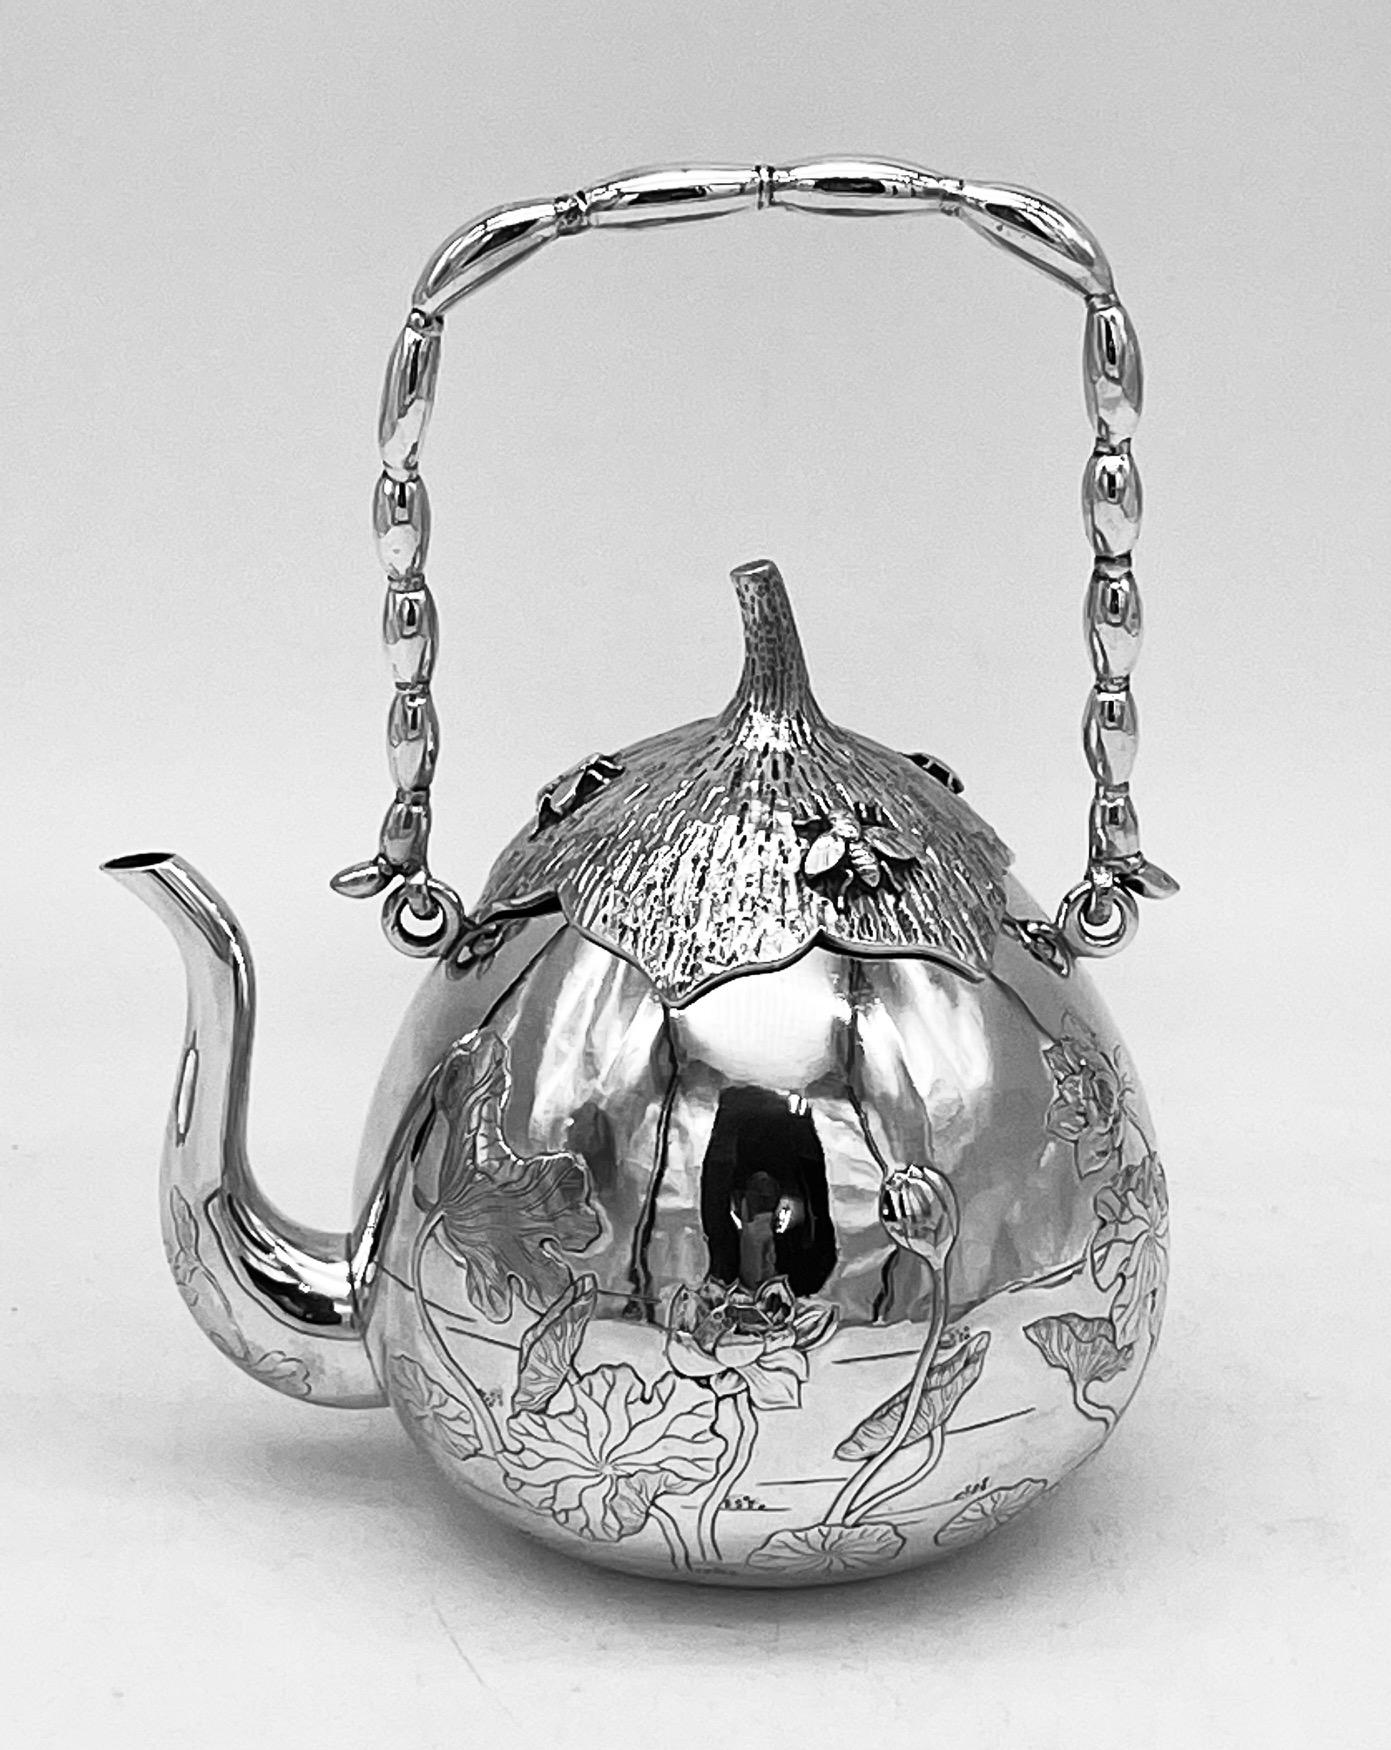 Late 19th Century Chinese Export Silver Teaset